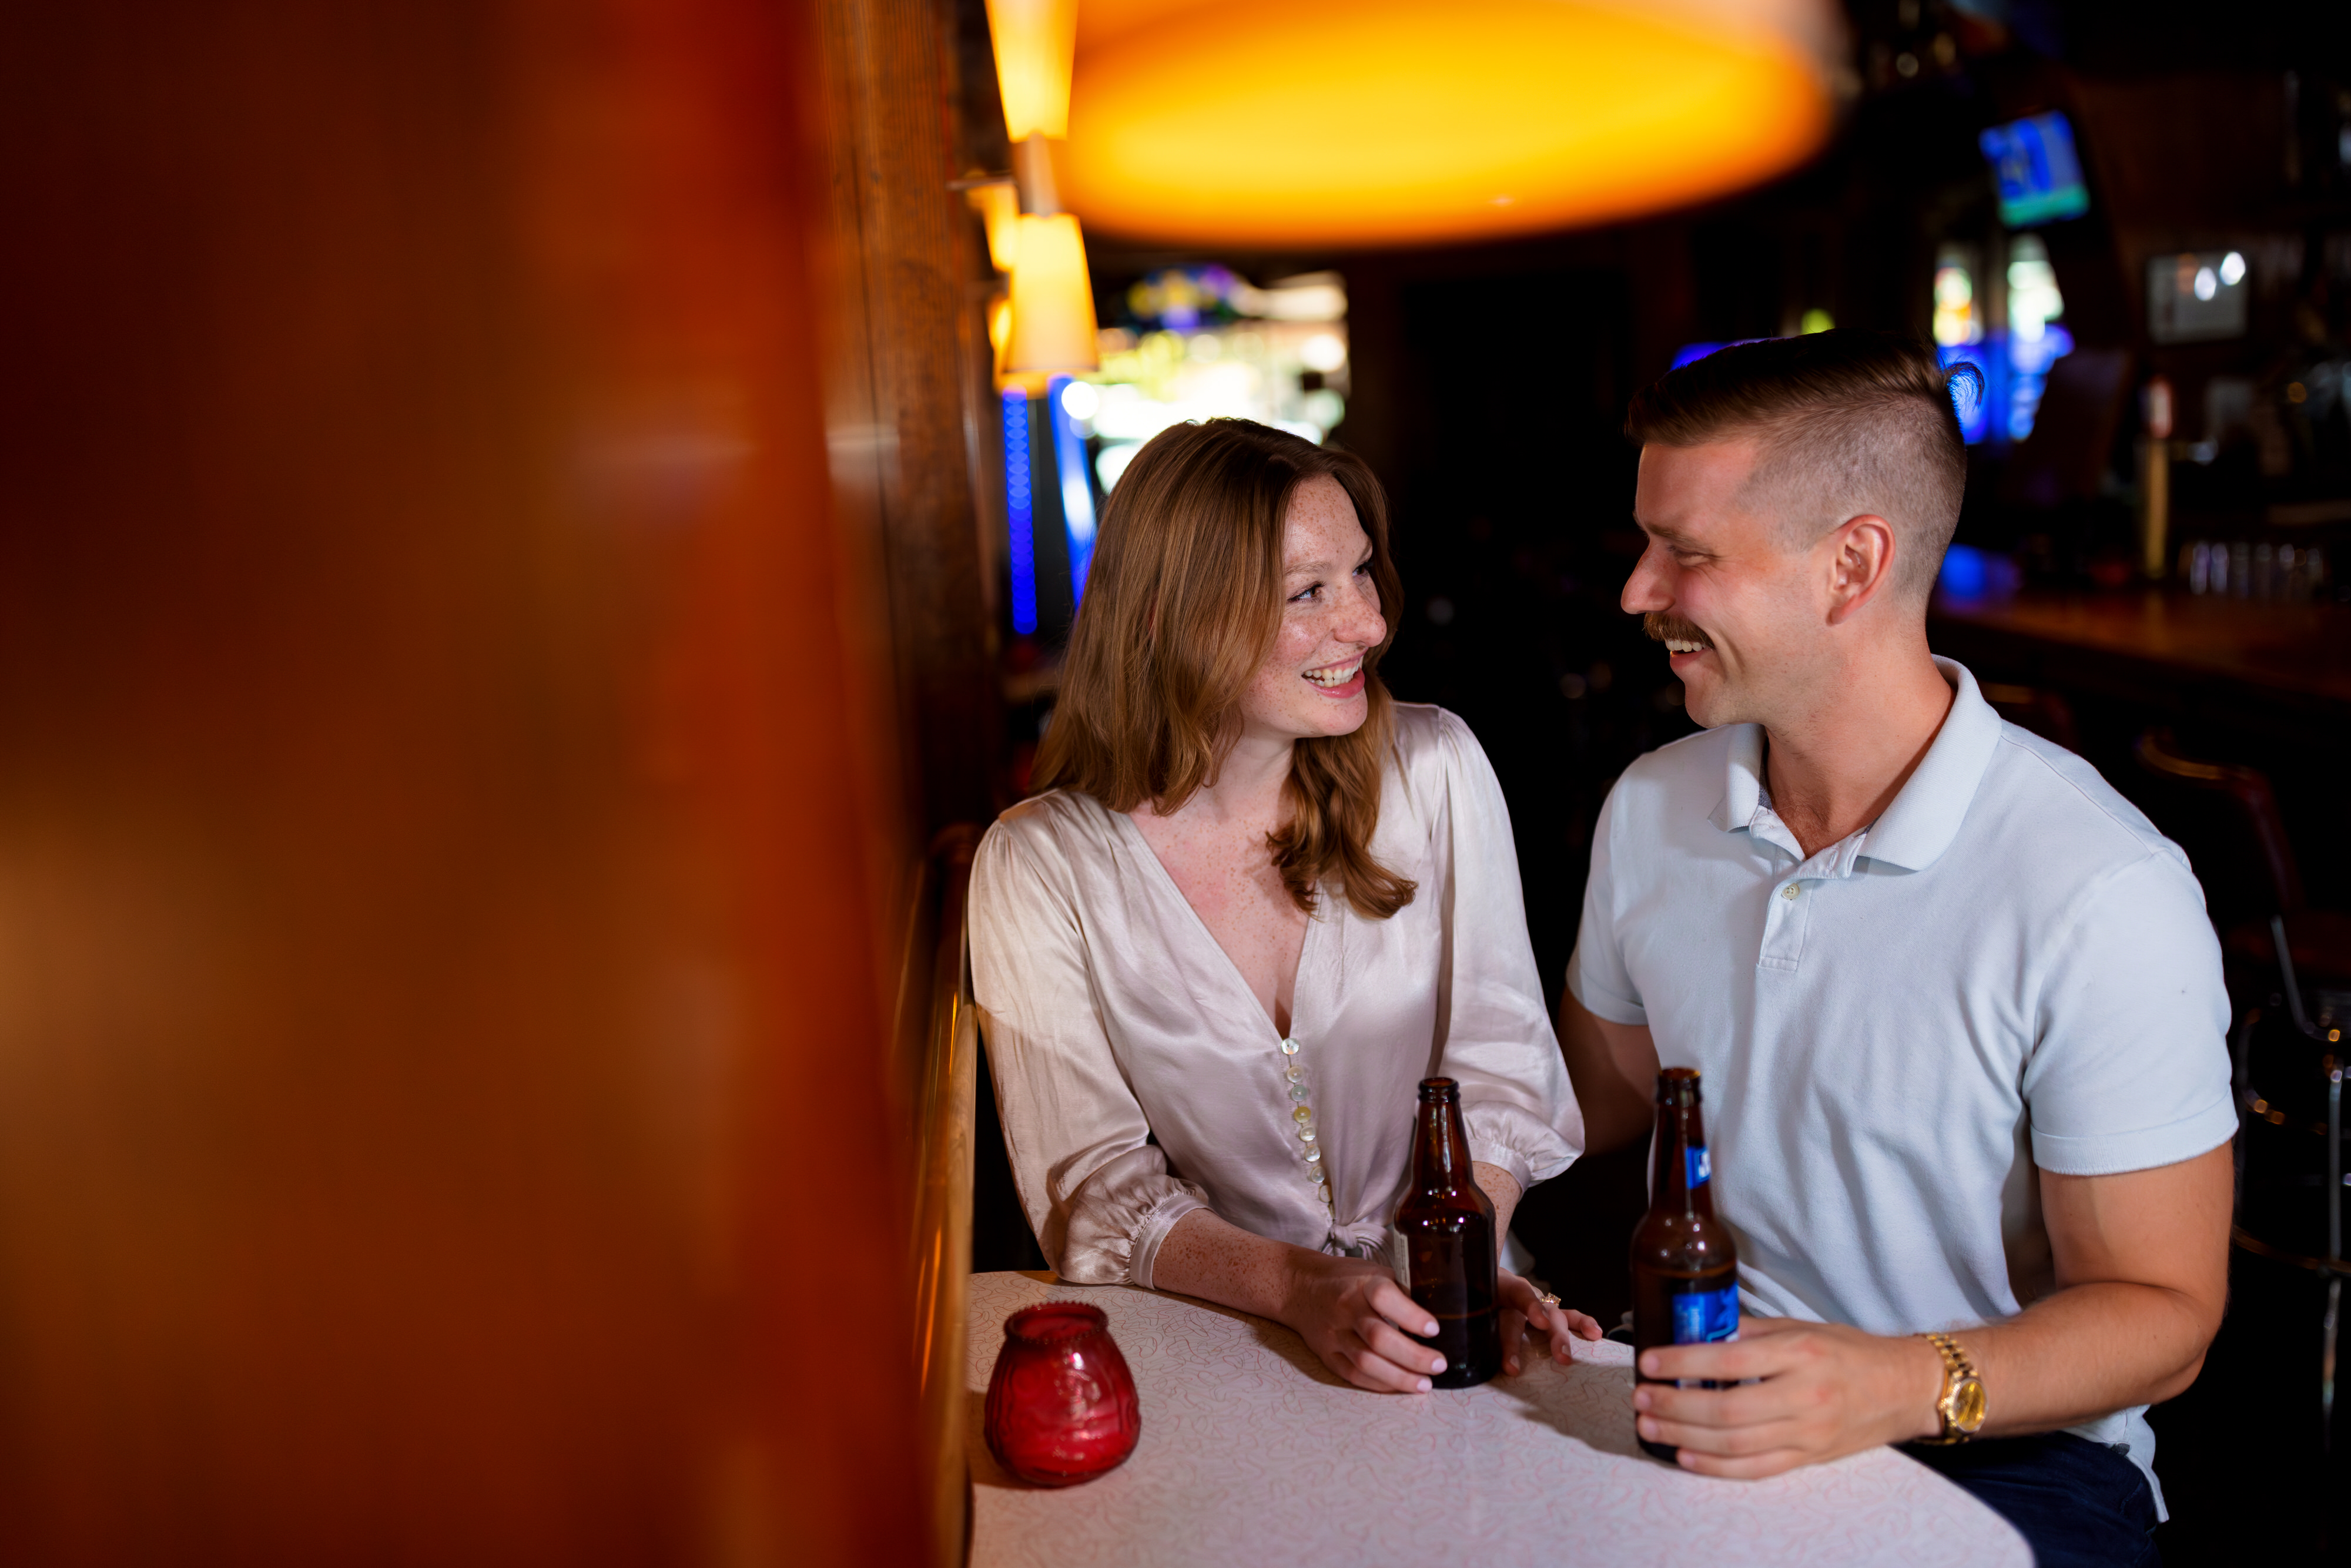 Couple shares beers at a bar during an engagement session in Chicago's Lincoln Park neighborhood